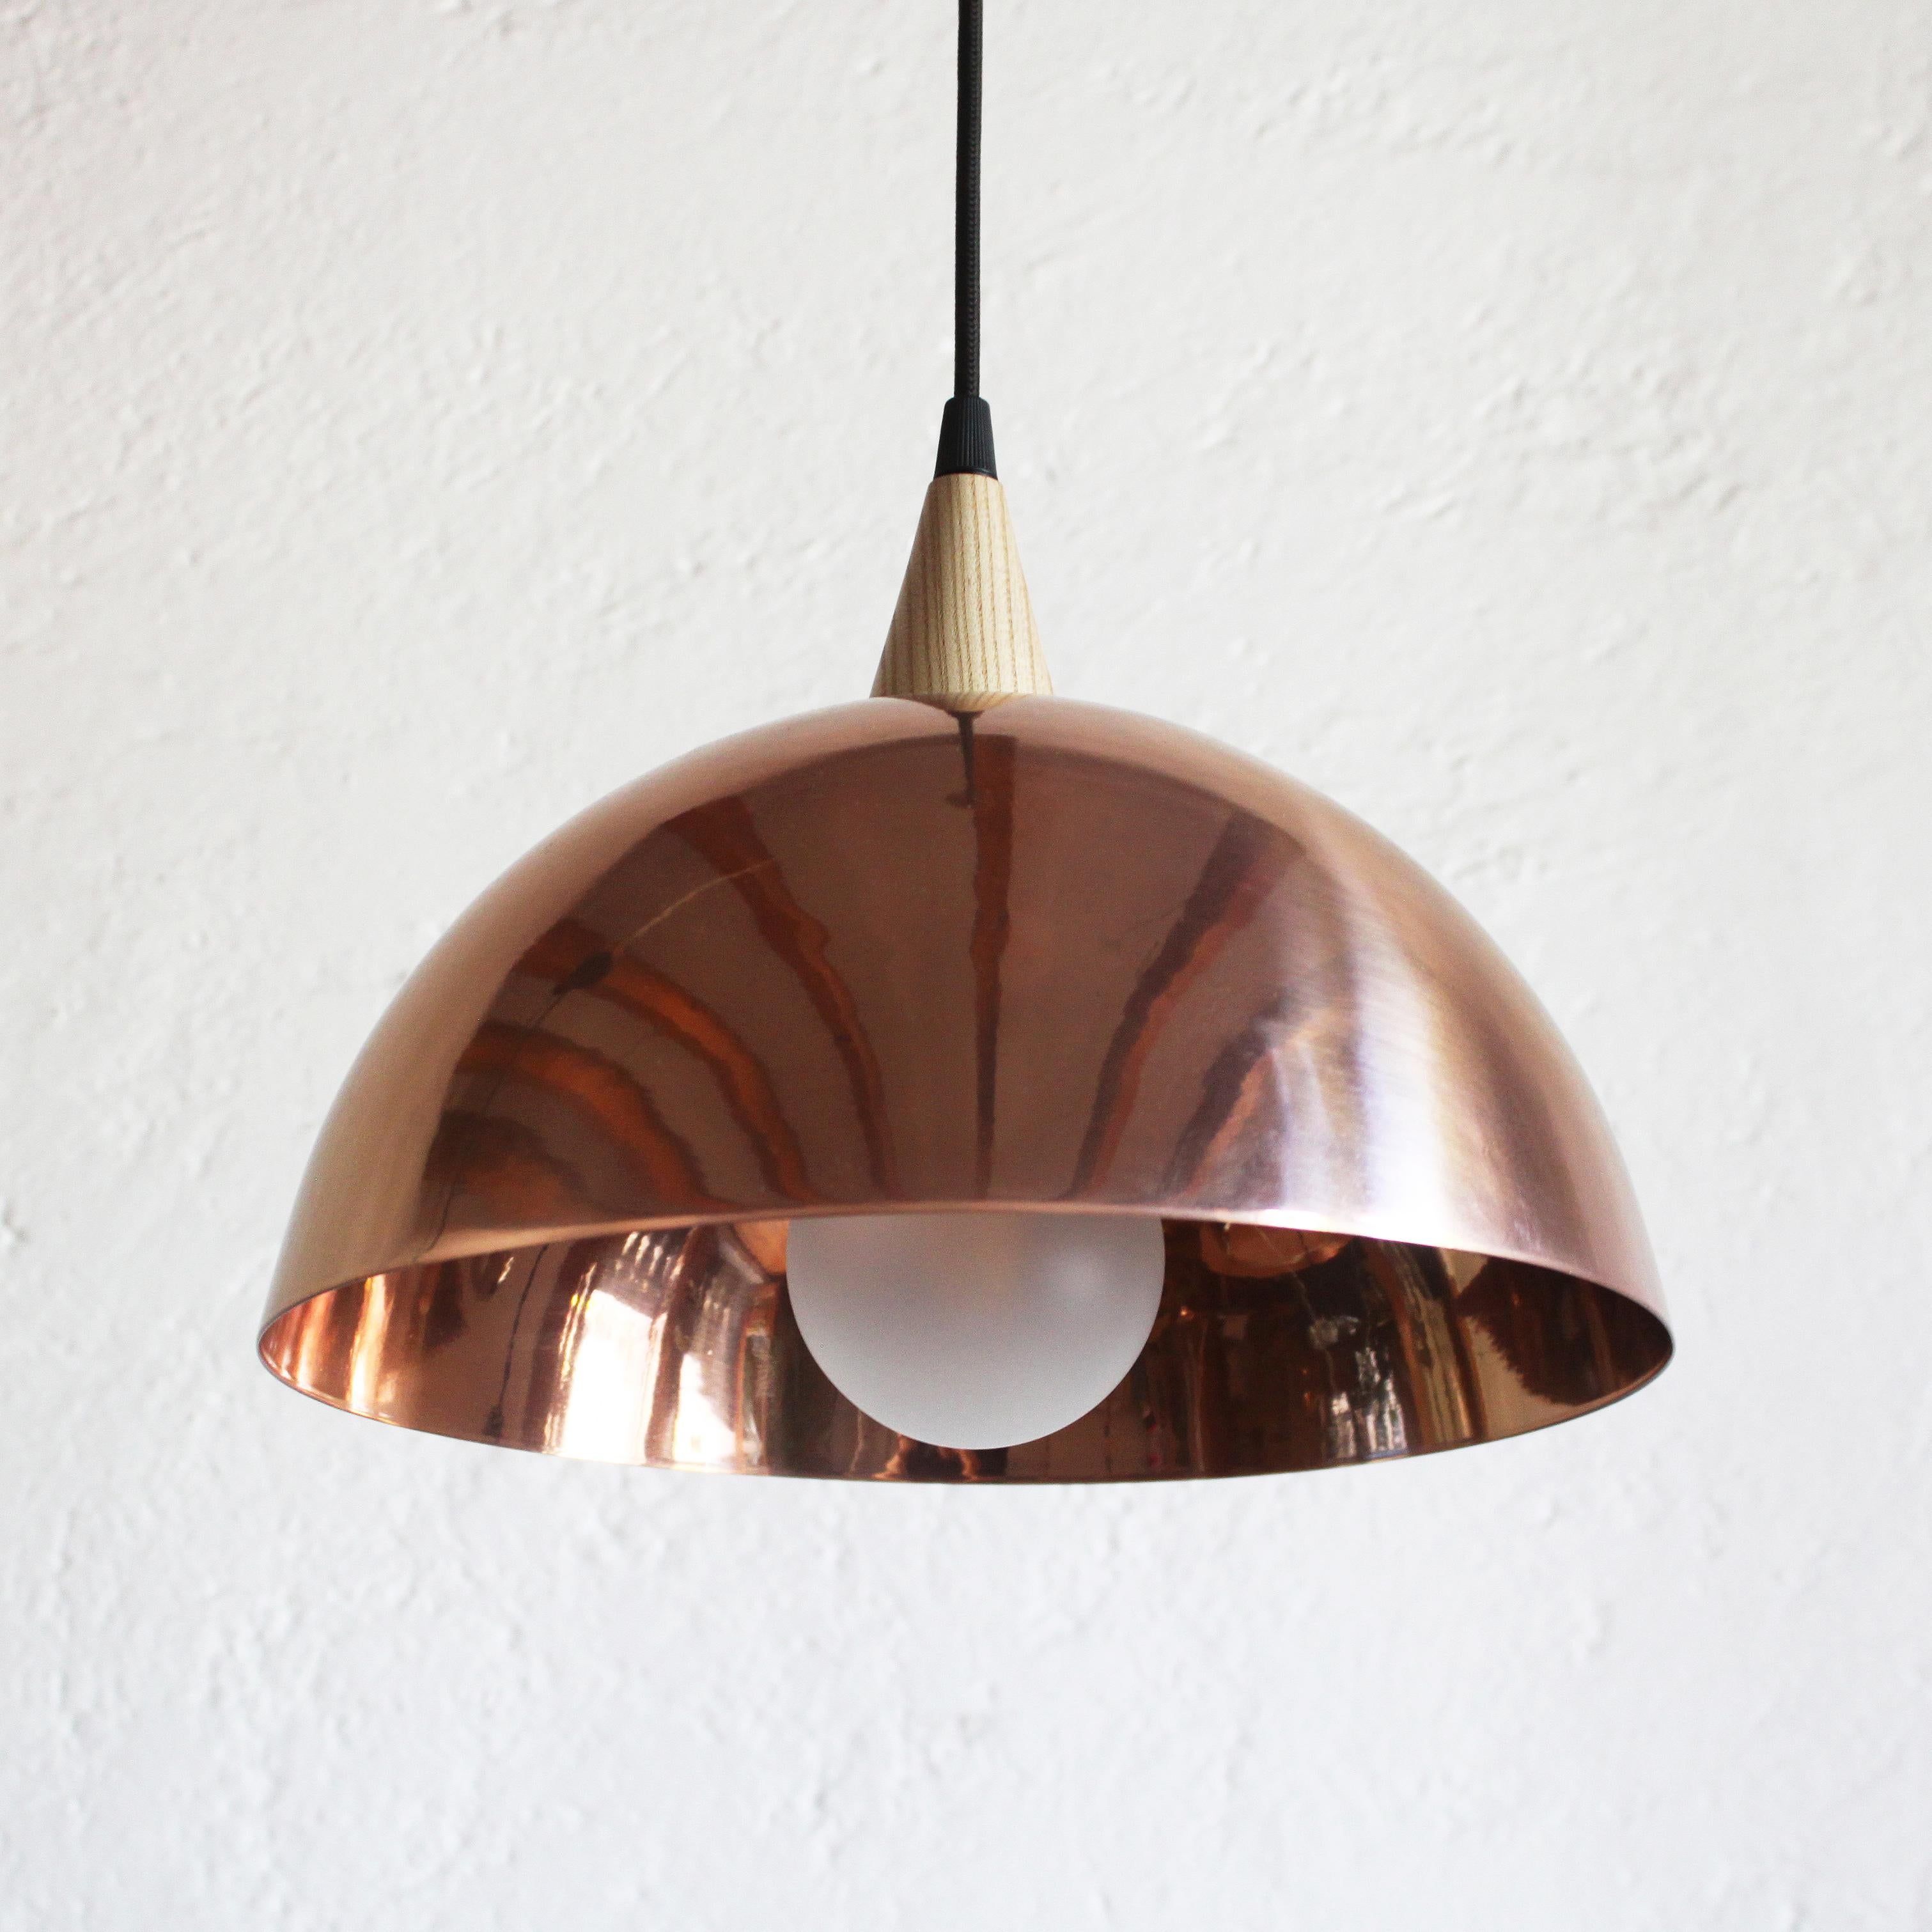 Domo Abajo is a ceiling lamp with dimmable feature (dimmer wall control not included). This pendant features a steel structure covered in electrostatic metal finish and wood detail. The dome is connected to the ceiling with adjustable black fabric